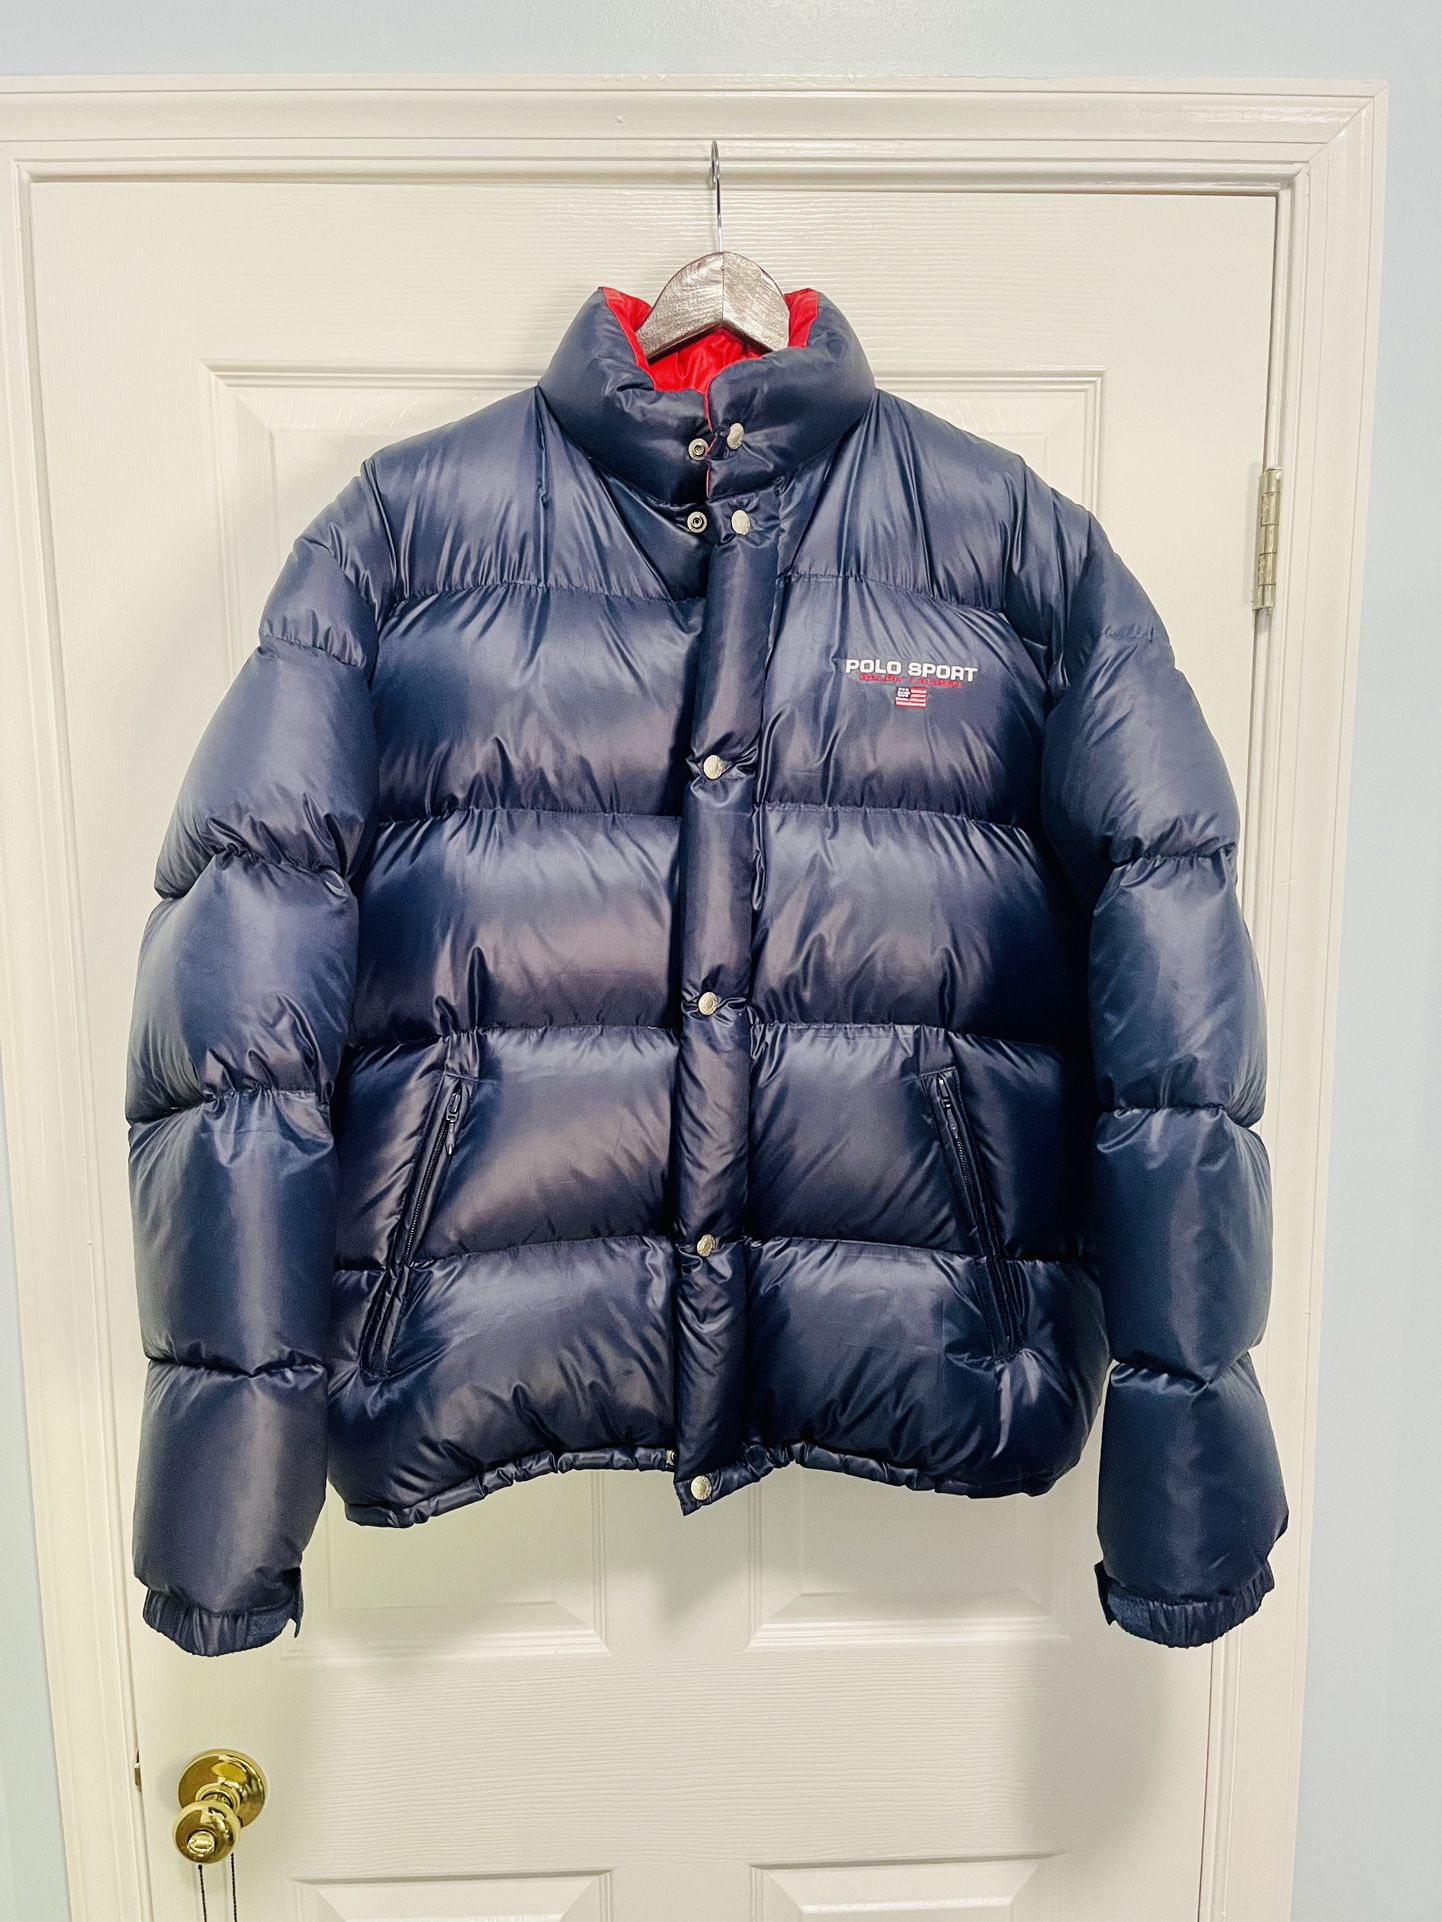 Vintage POLO SPORT Puffer Jacket